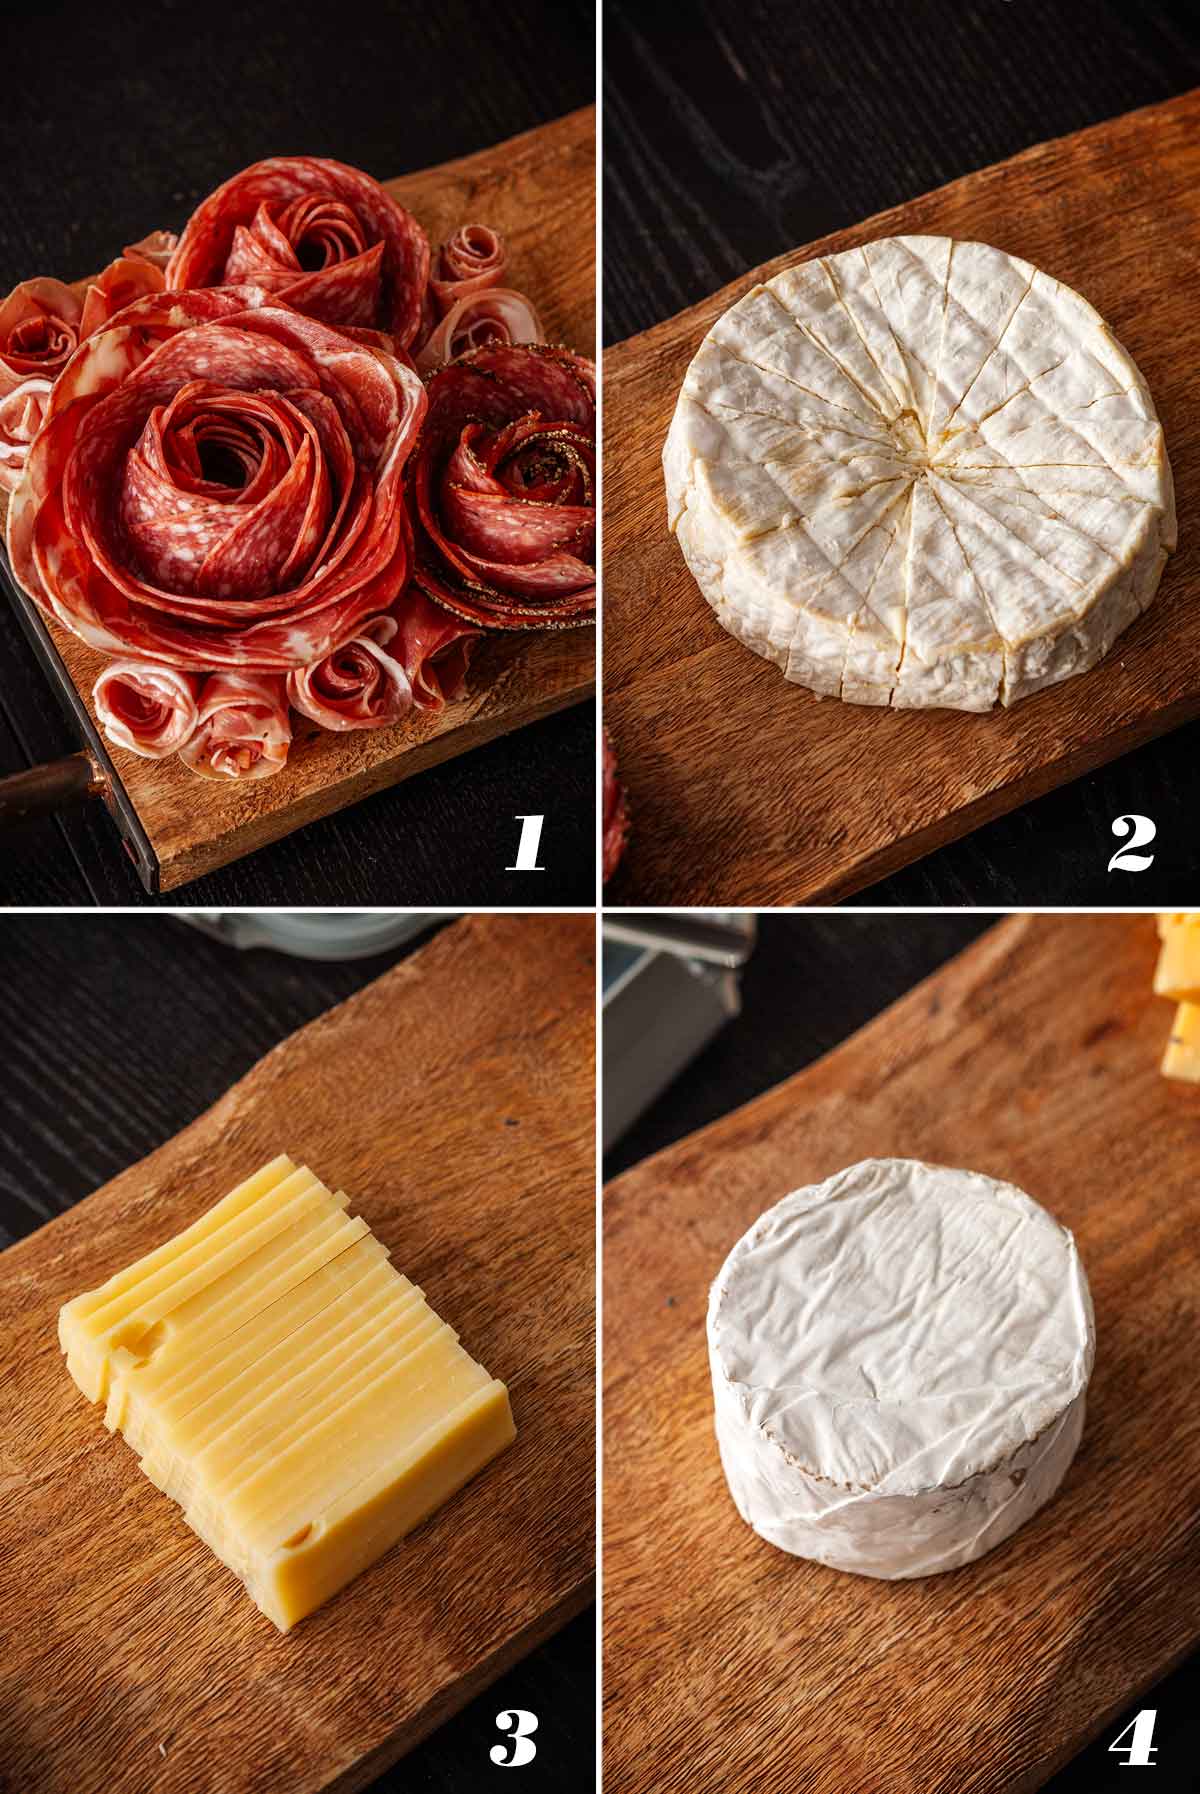 A collage of 4 numbered images showing how to add meat roses and 3 cheeses to a cheese board.